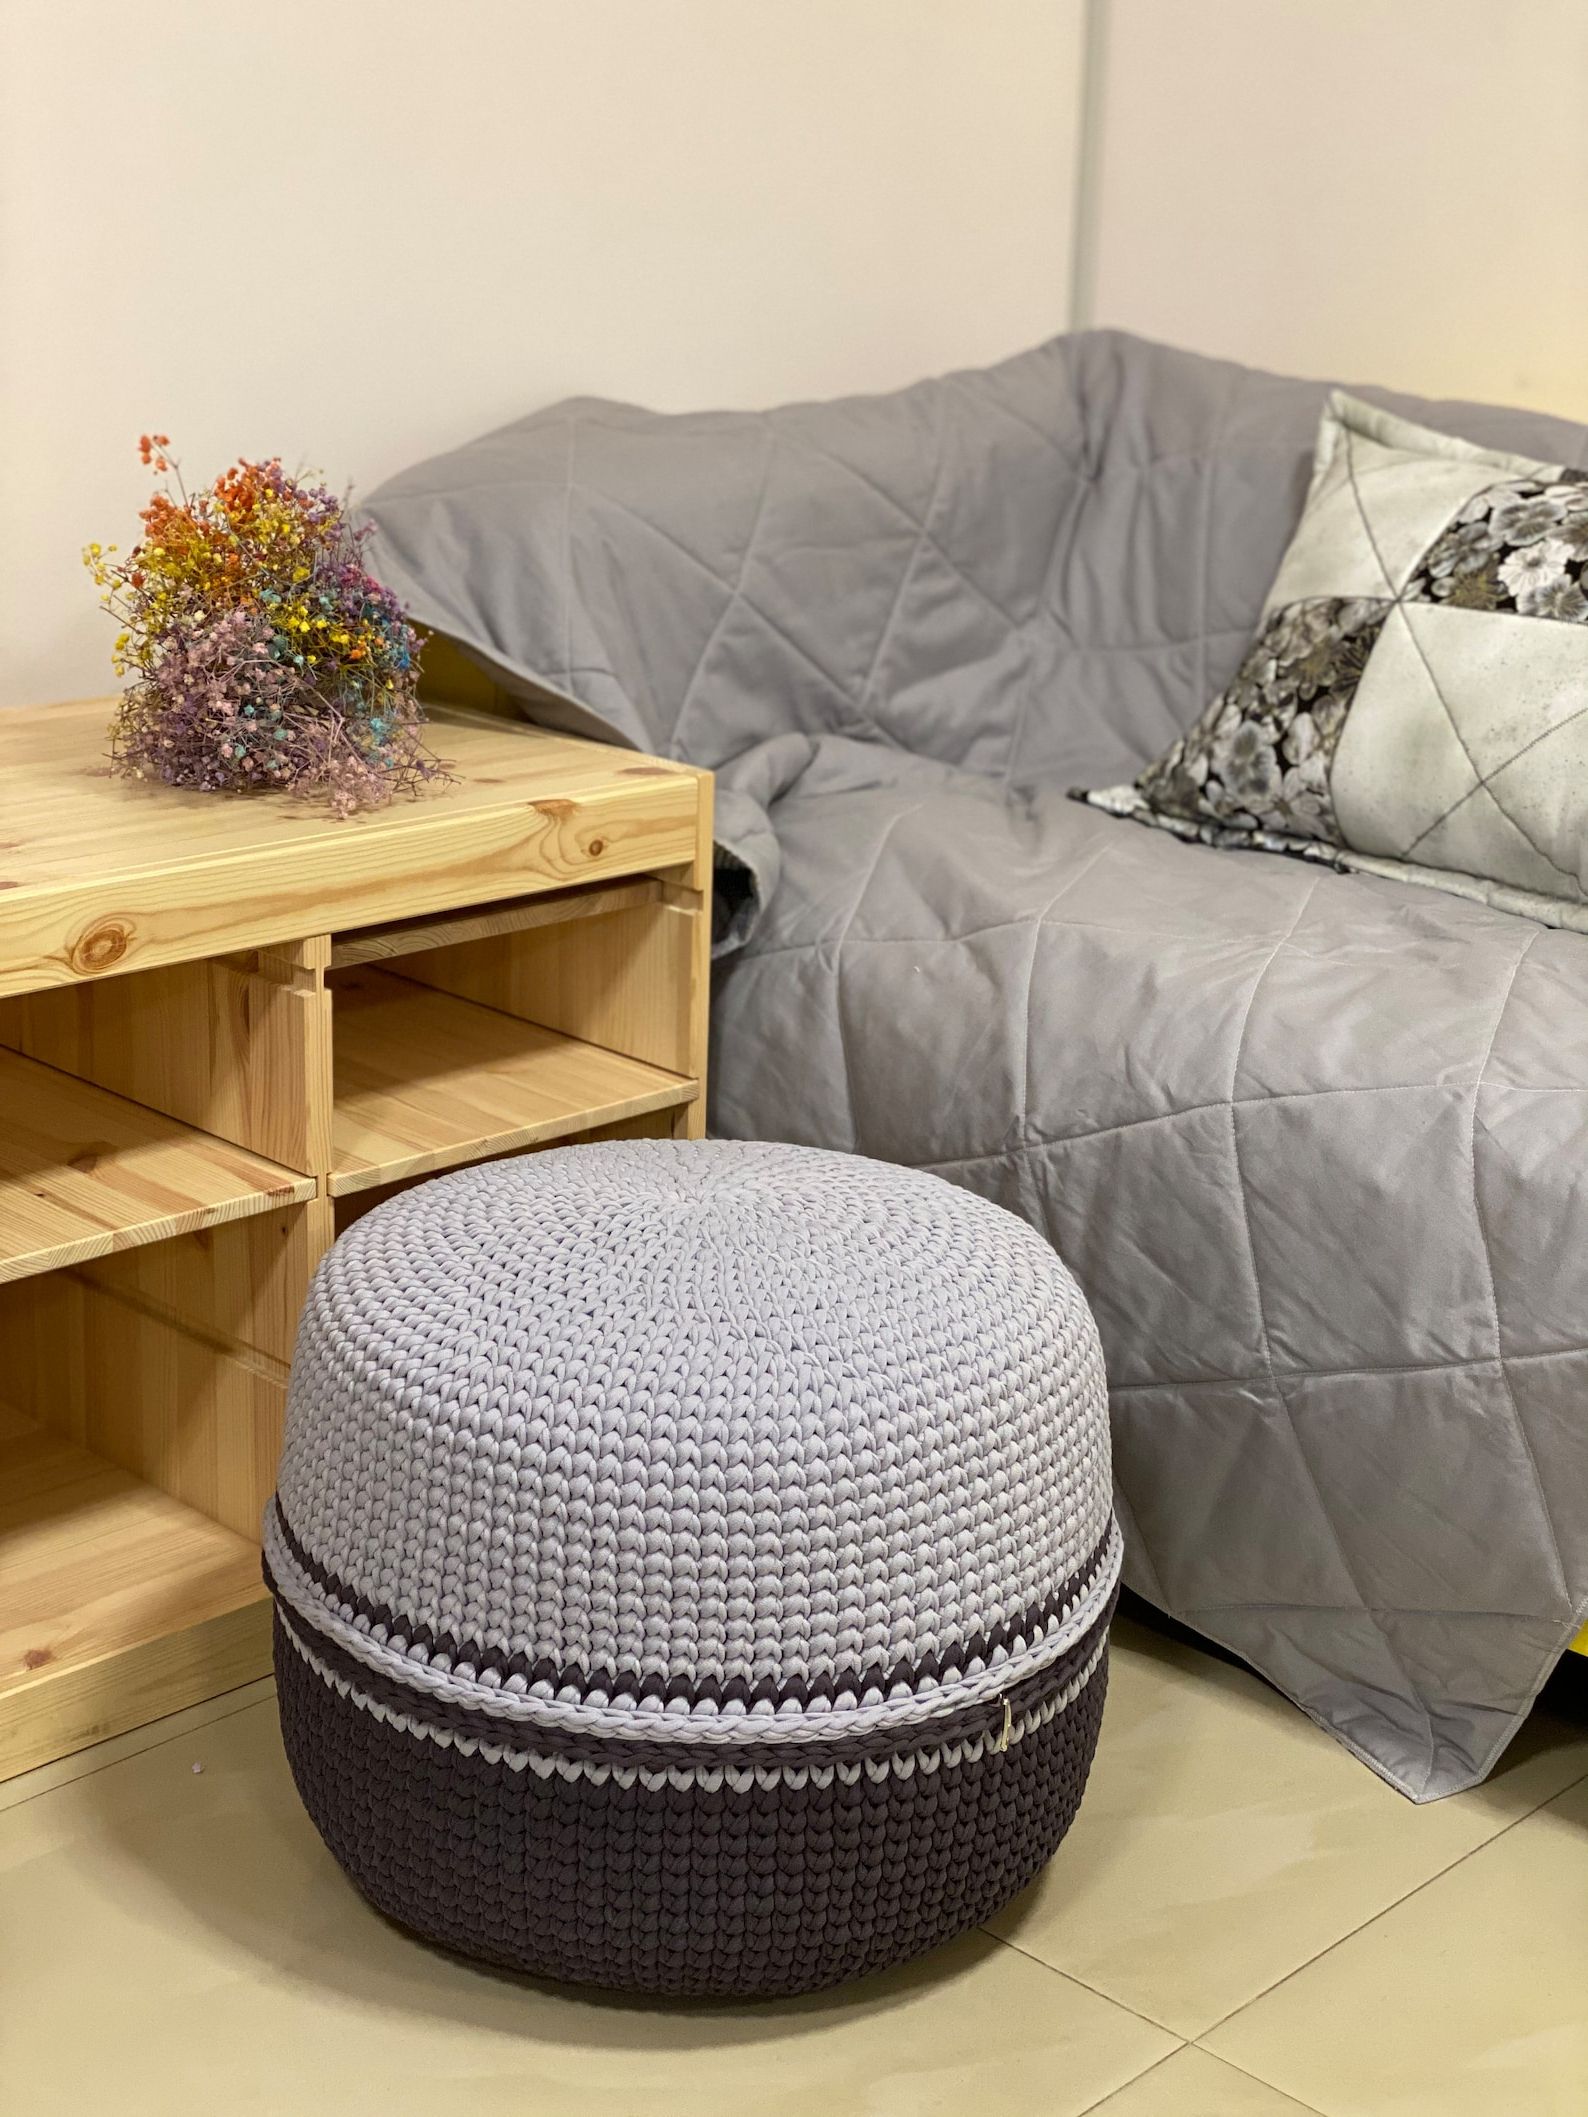 Knitted Cotton Soft Gray Ottoman For Extra Seating And Fun (View 6 of 10)